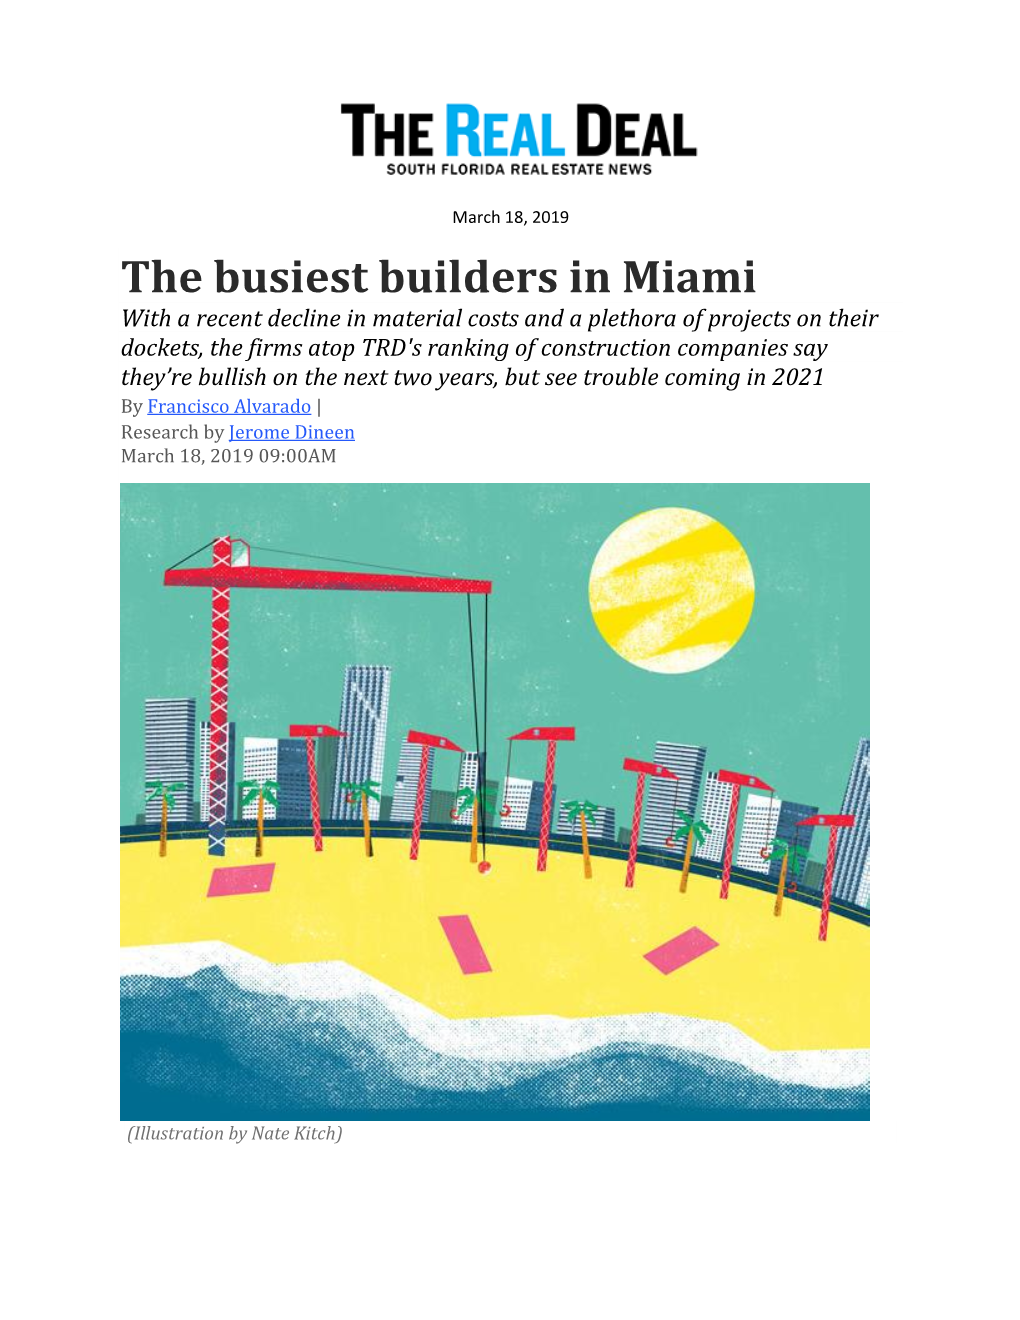 The Busiest Builders in Miami